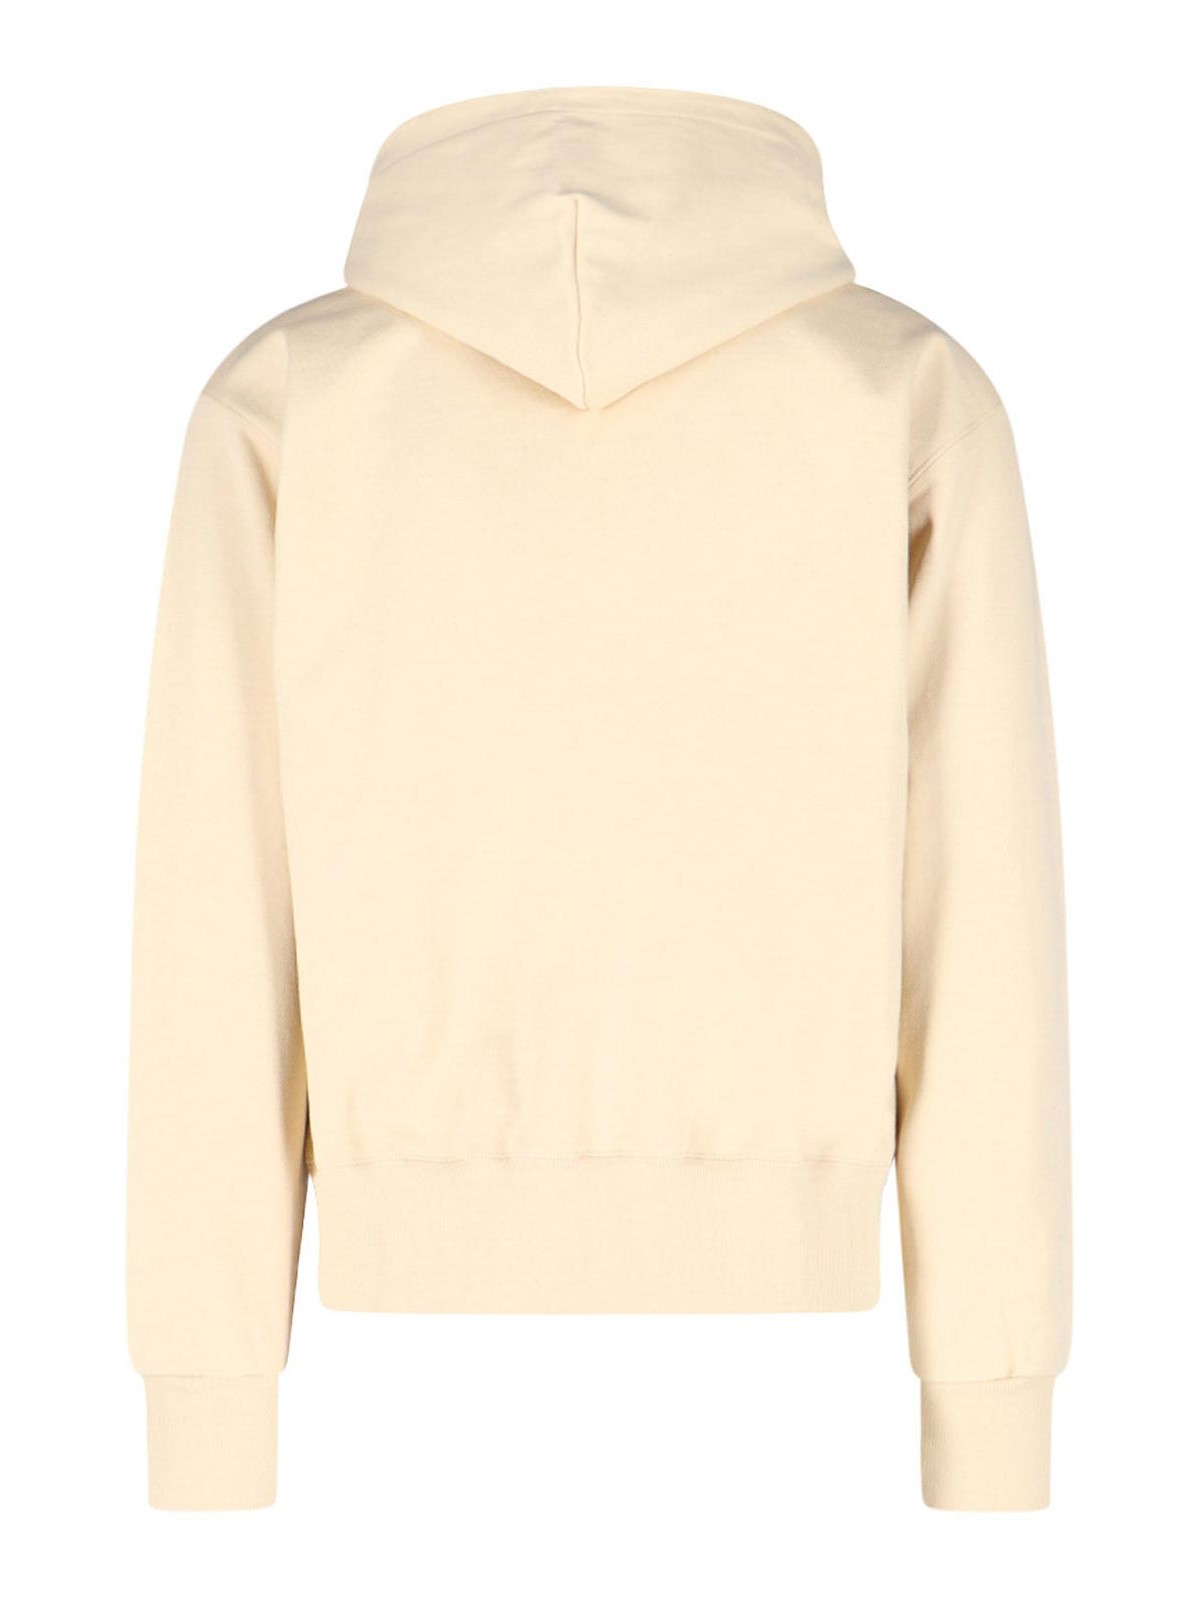 Lace cotton hoodie - Andersson Bell - Men